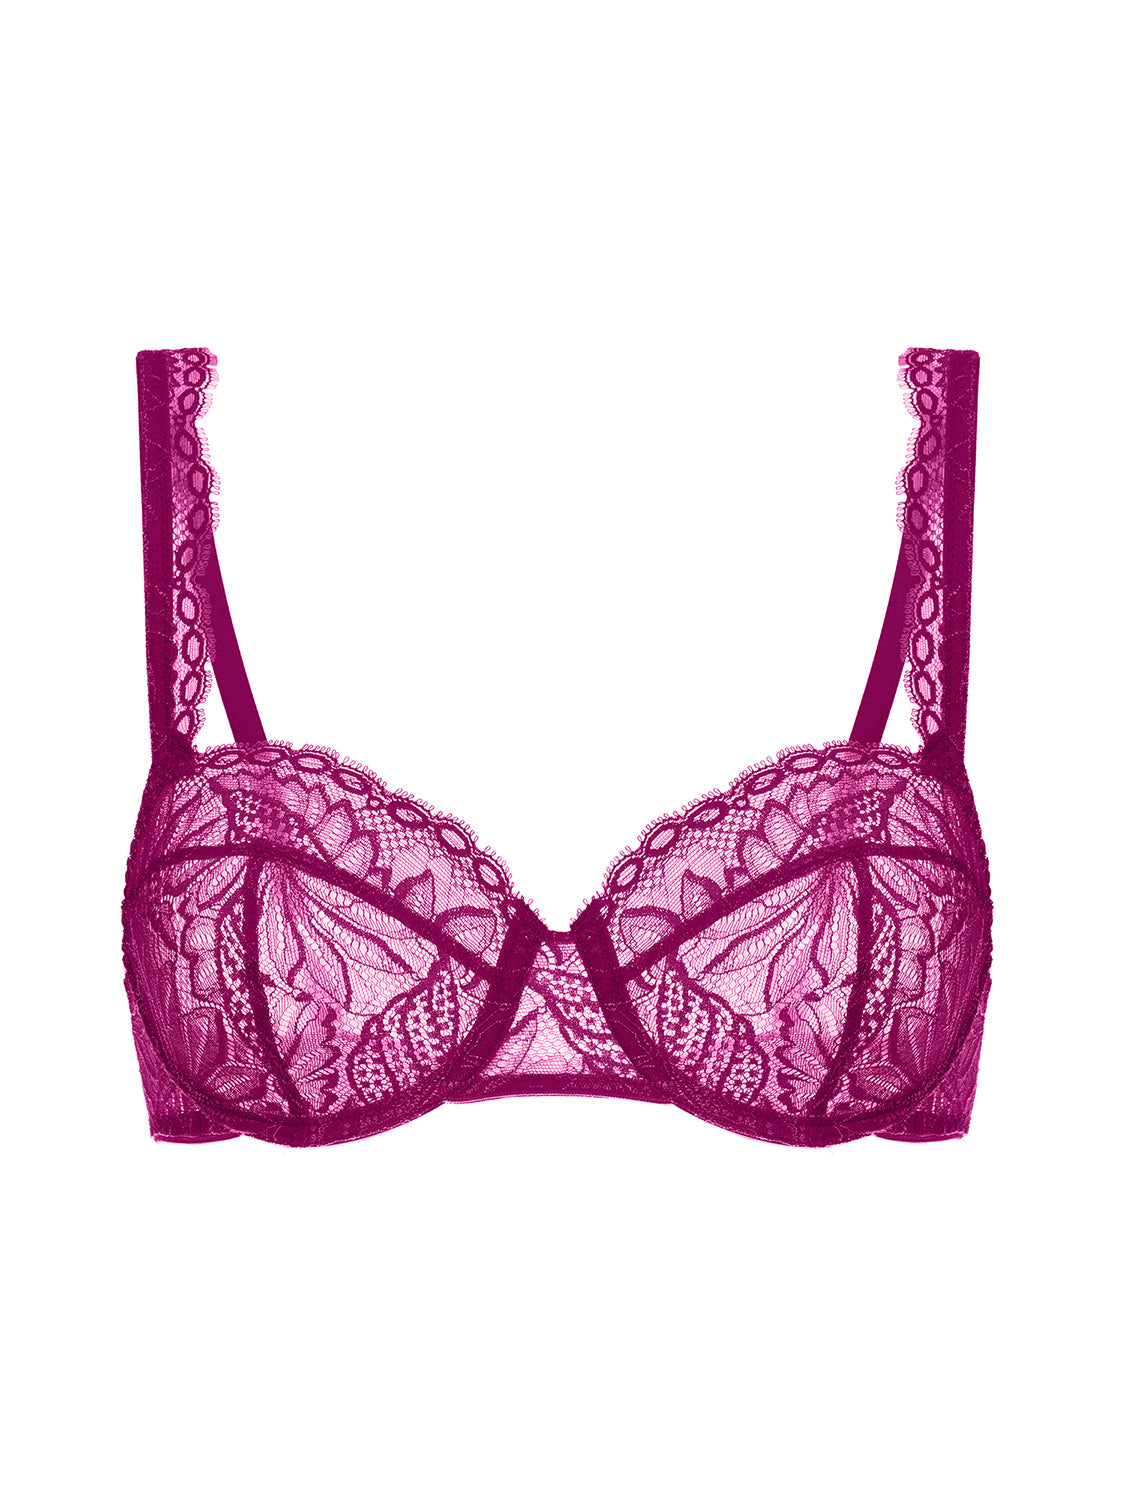 Soutiens-gorge Triangle, Embody Lingerie